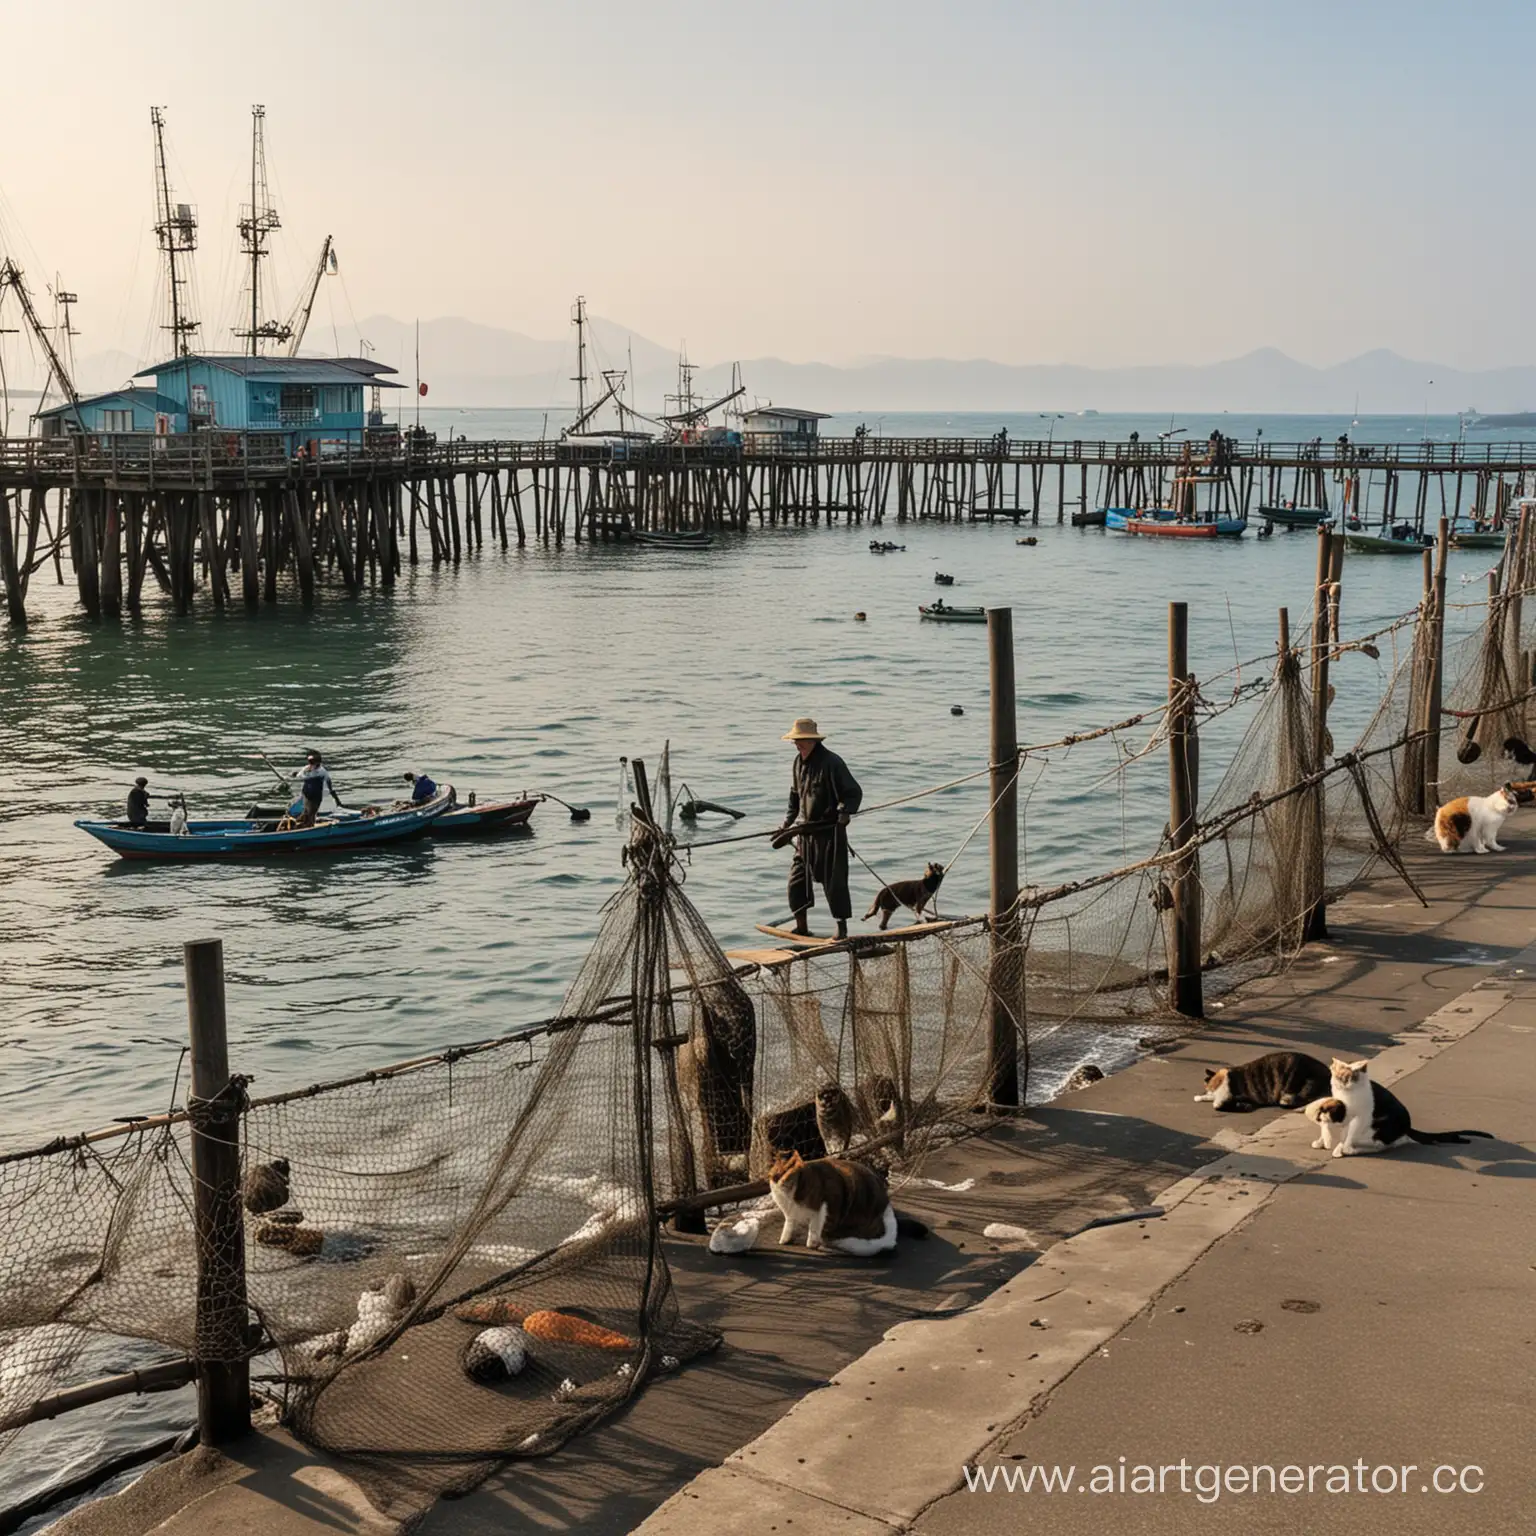 Japanese-Fishermen-with-Nets-by-the-Pier-Surrounded-by-Cats